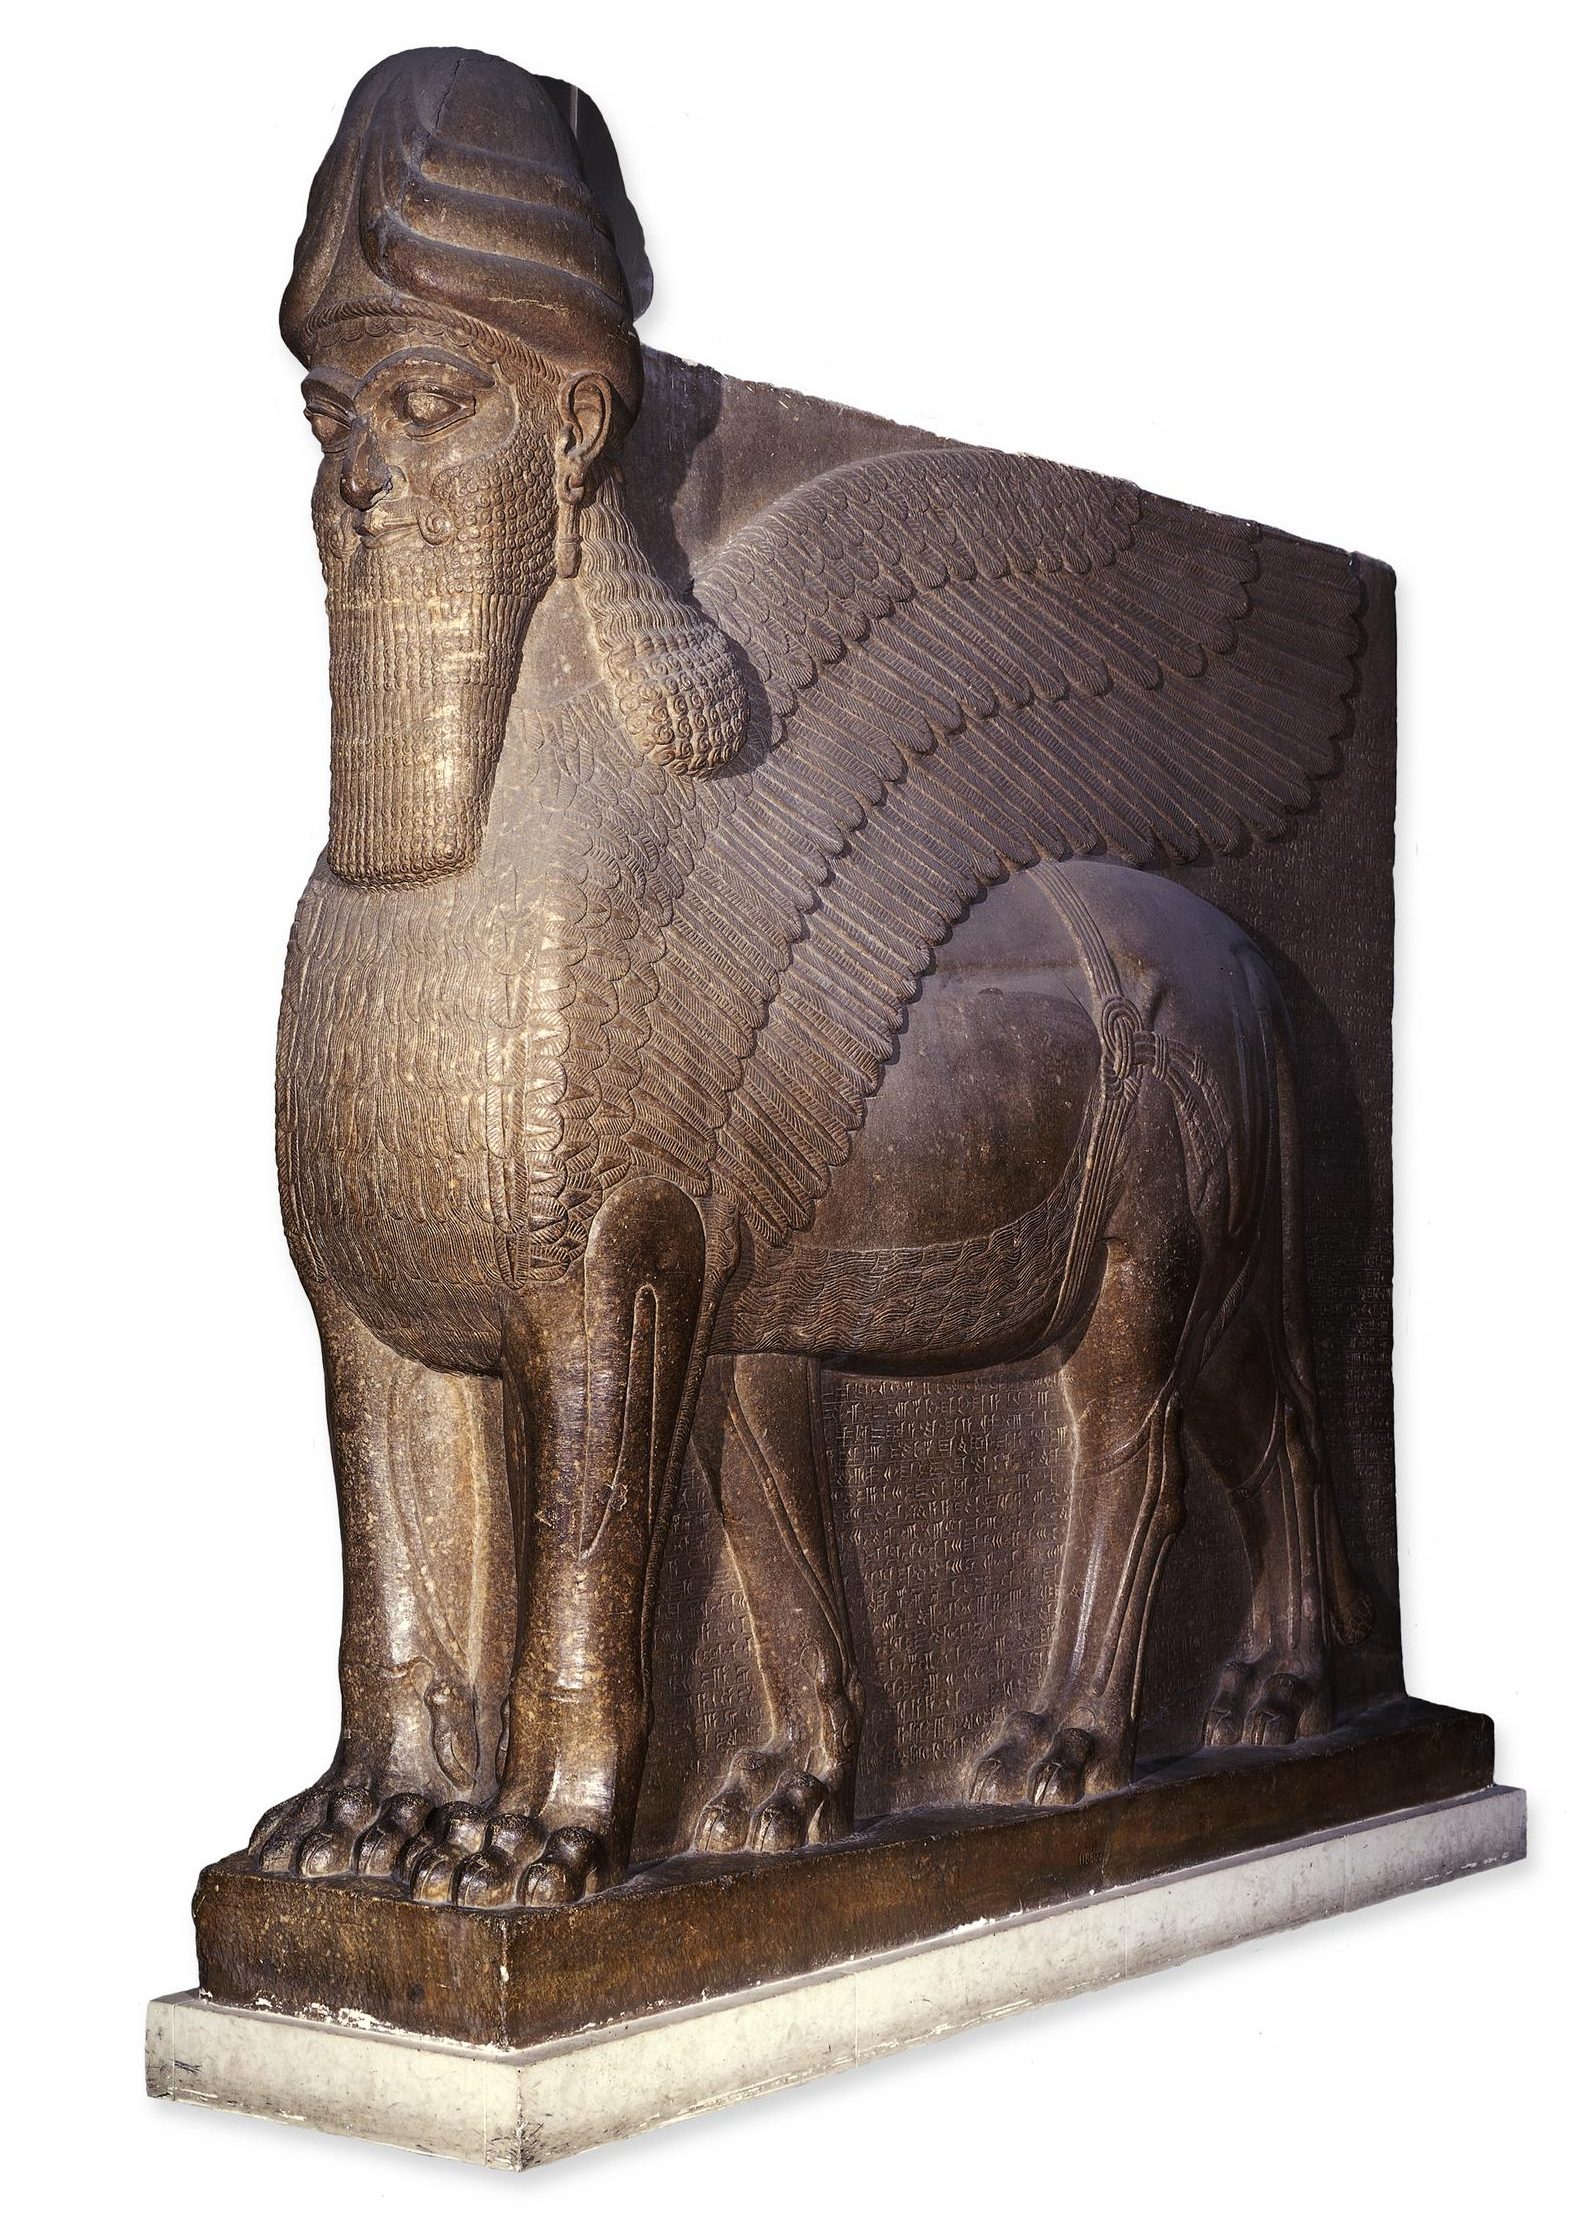 Gypsum statue; human headed winged lion; one of a pair that flanked the doorway of the throne room of the North West palace of Ashurnasirpal in Nimrud; helped provide magical protection; the five legs suggest that the lion was intended to be viewed from the front or side and not at an intermediate angle.